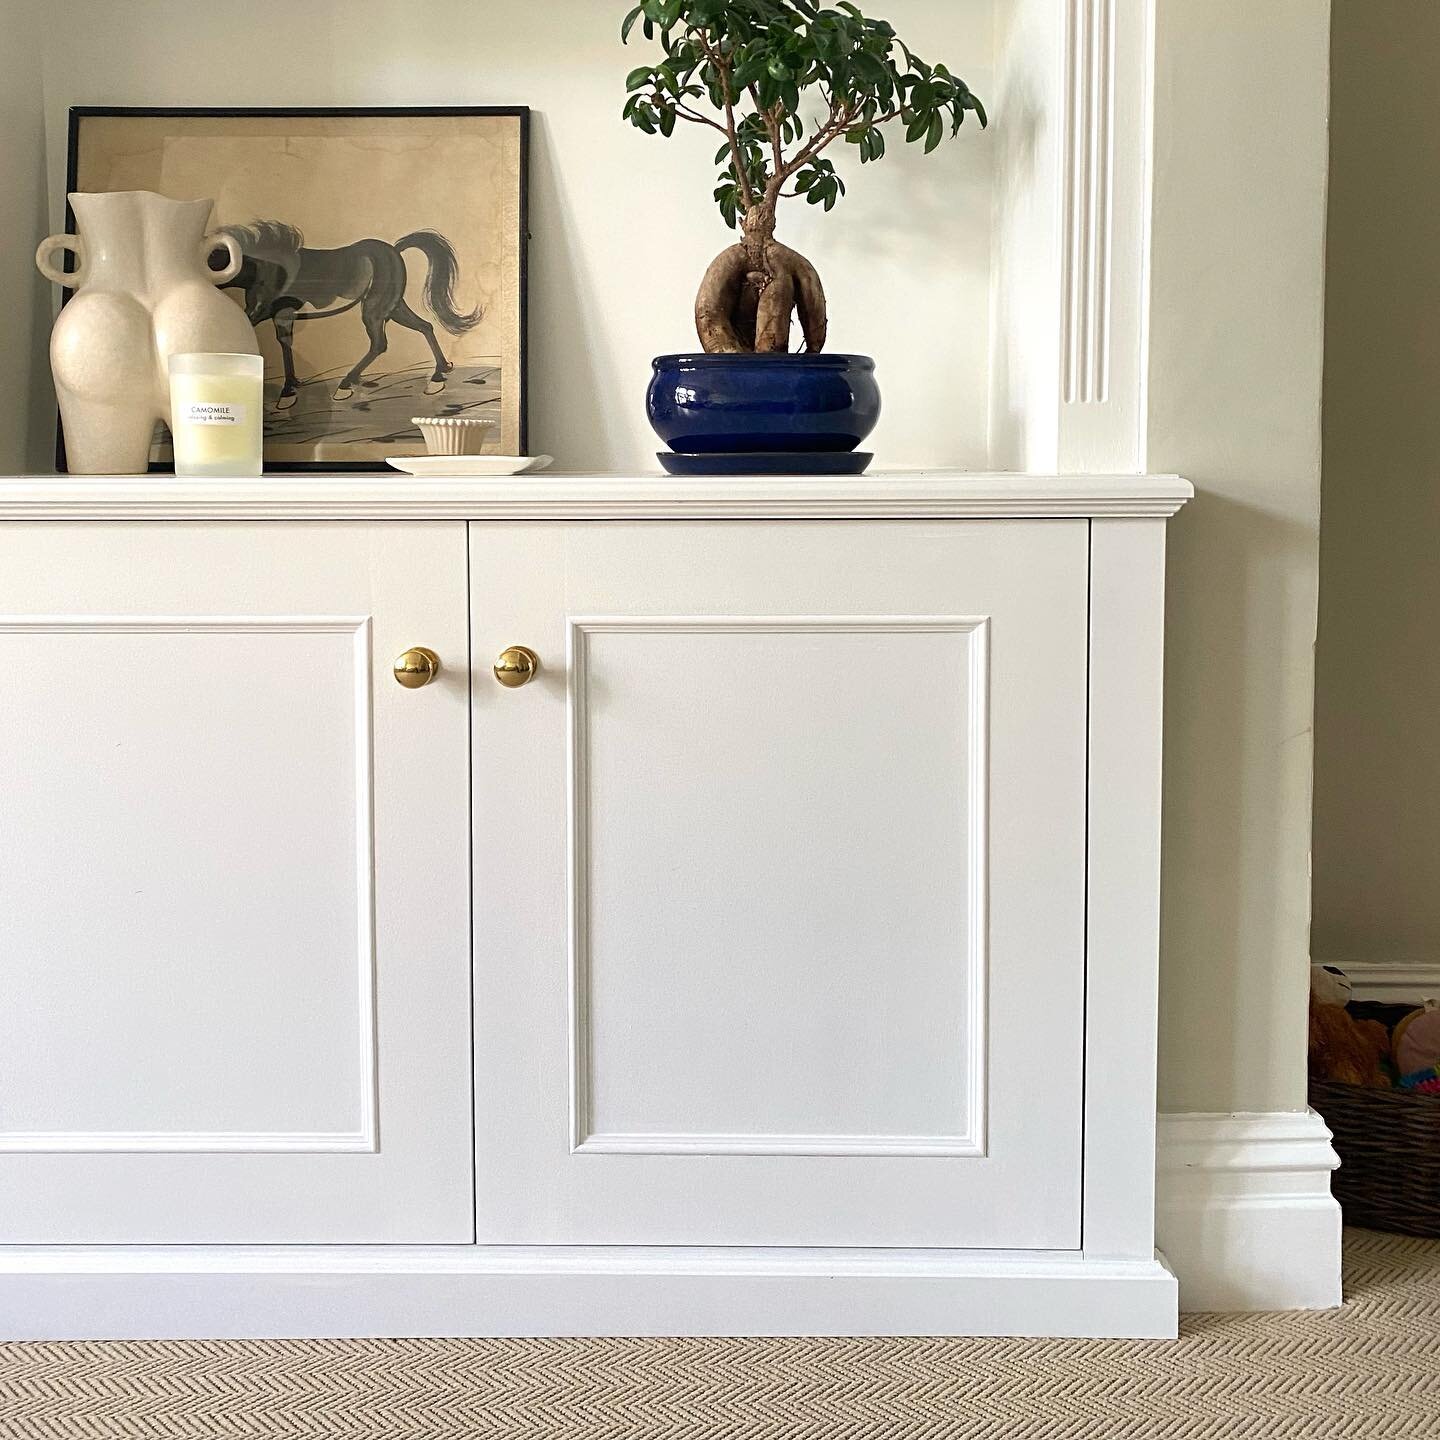 I Finished some alcove units recently, painted in brilliant white with lots of Victorian details, clients are over the moon with the finished article, always nice to see 👌